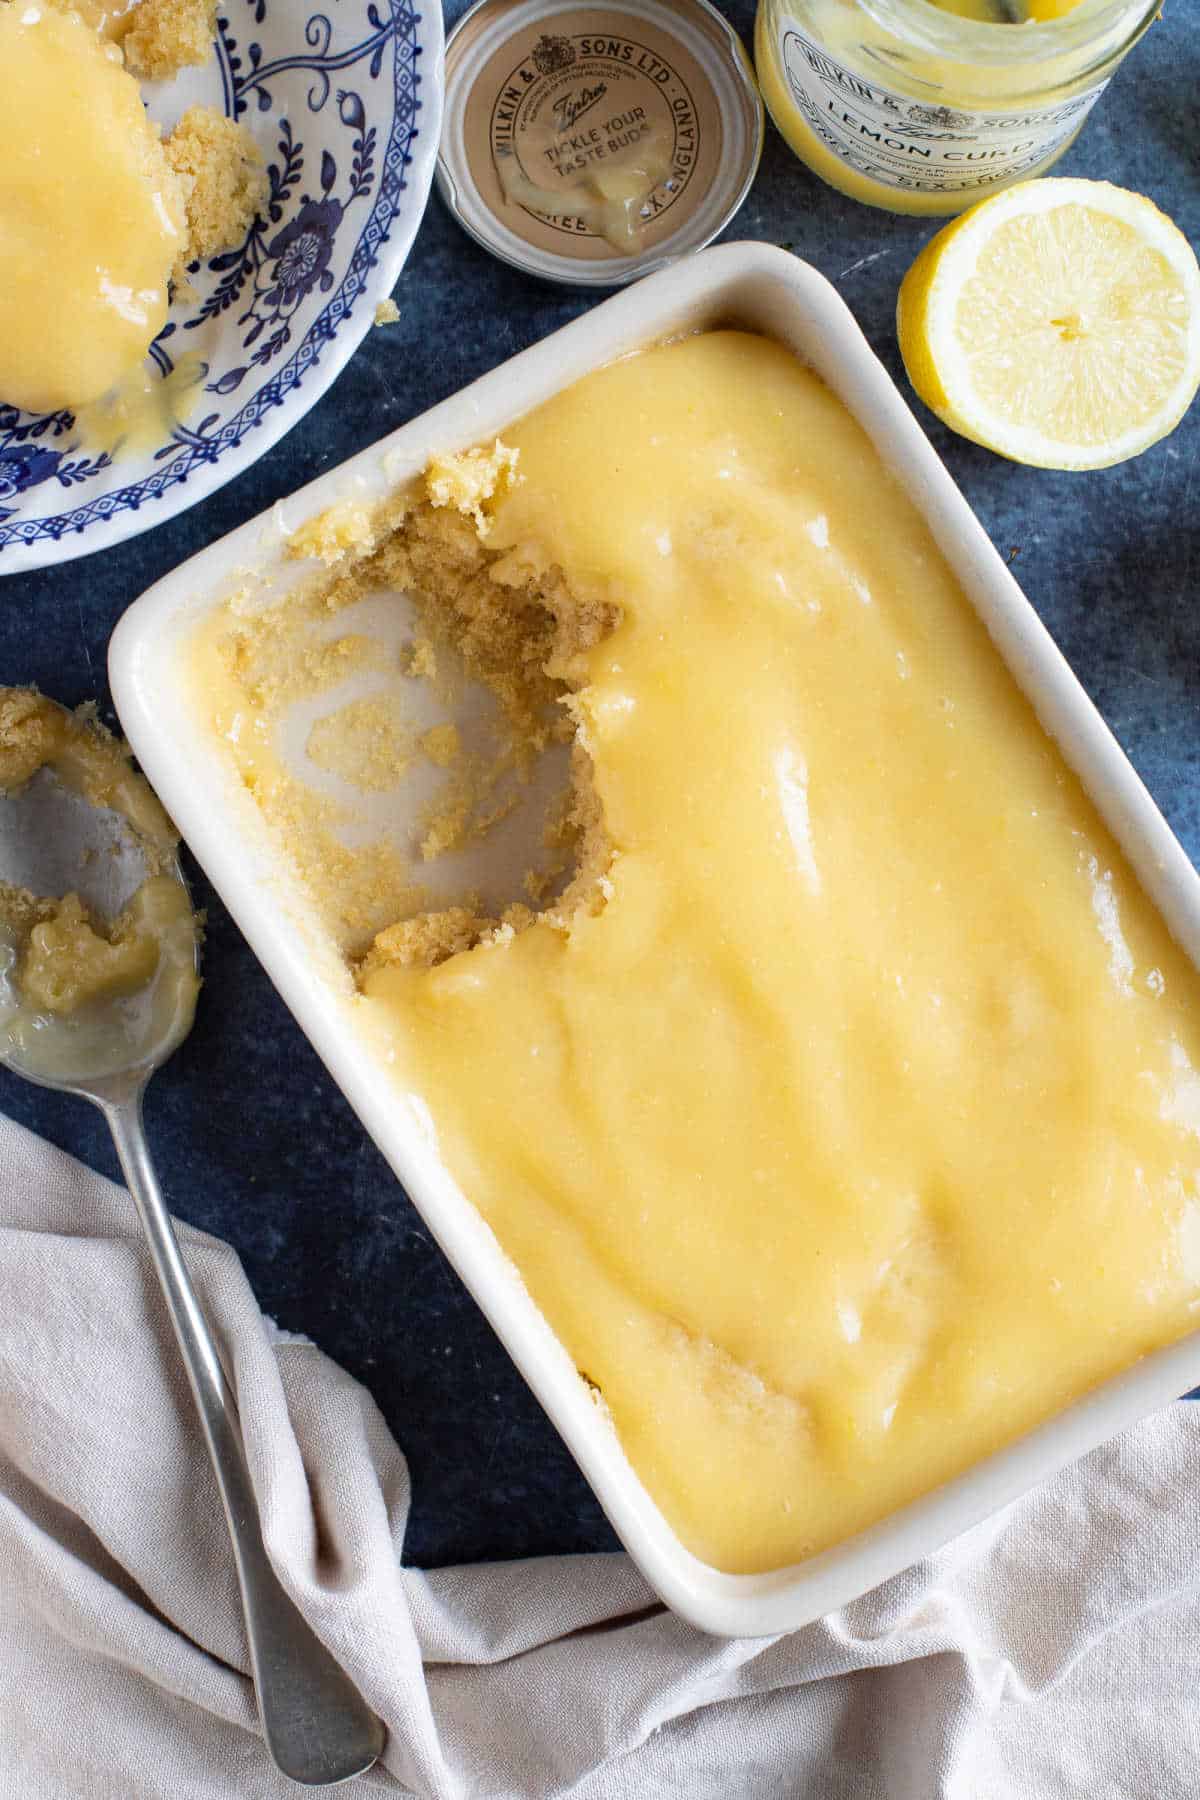 Lemon curd pudding in a serving dish.